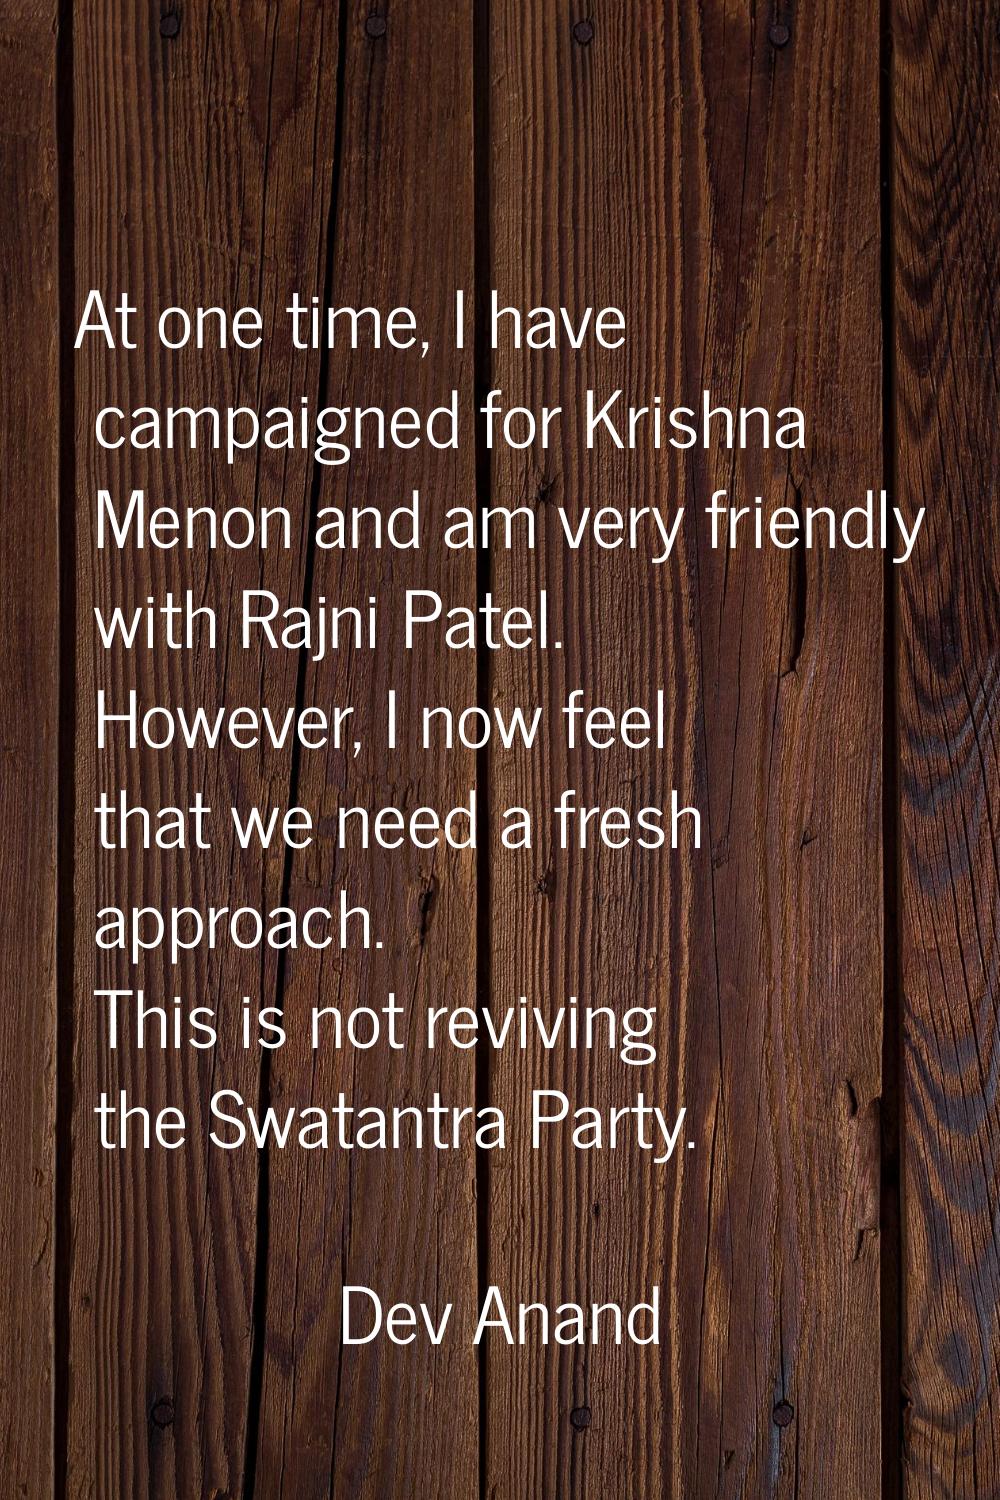 At one time, I have campaigned for Krishna Menon and am very friendly with Rajni Patel. However, I 